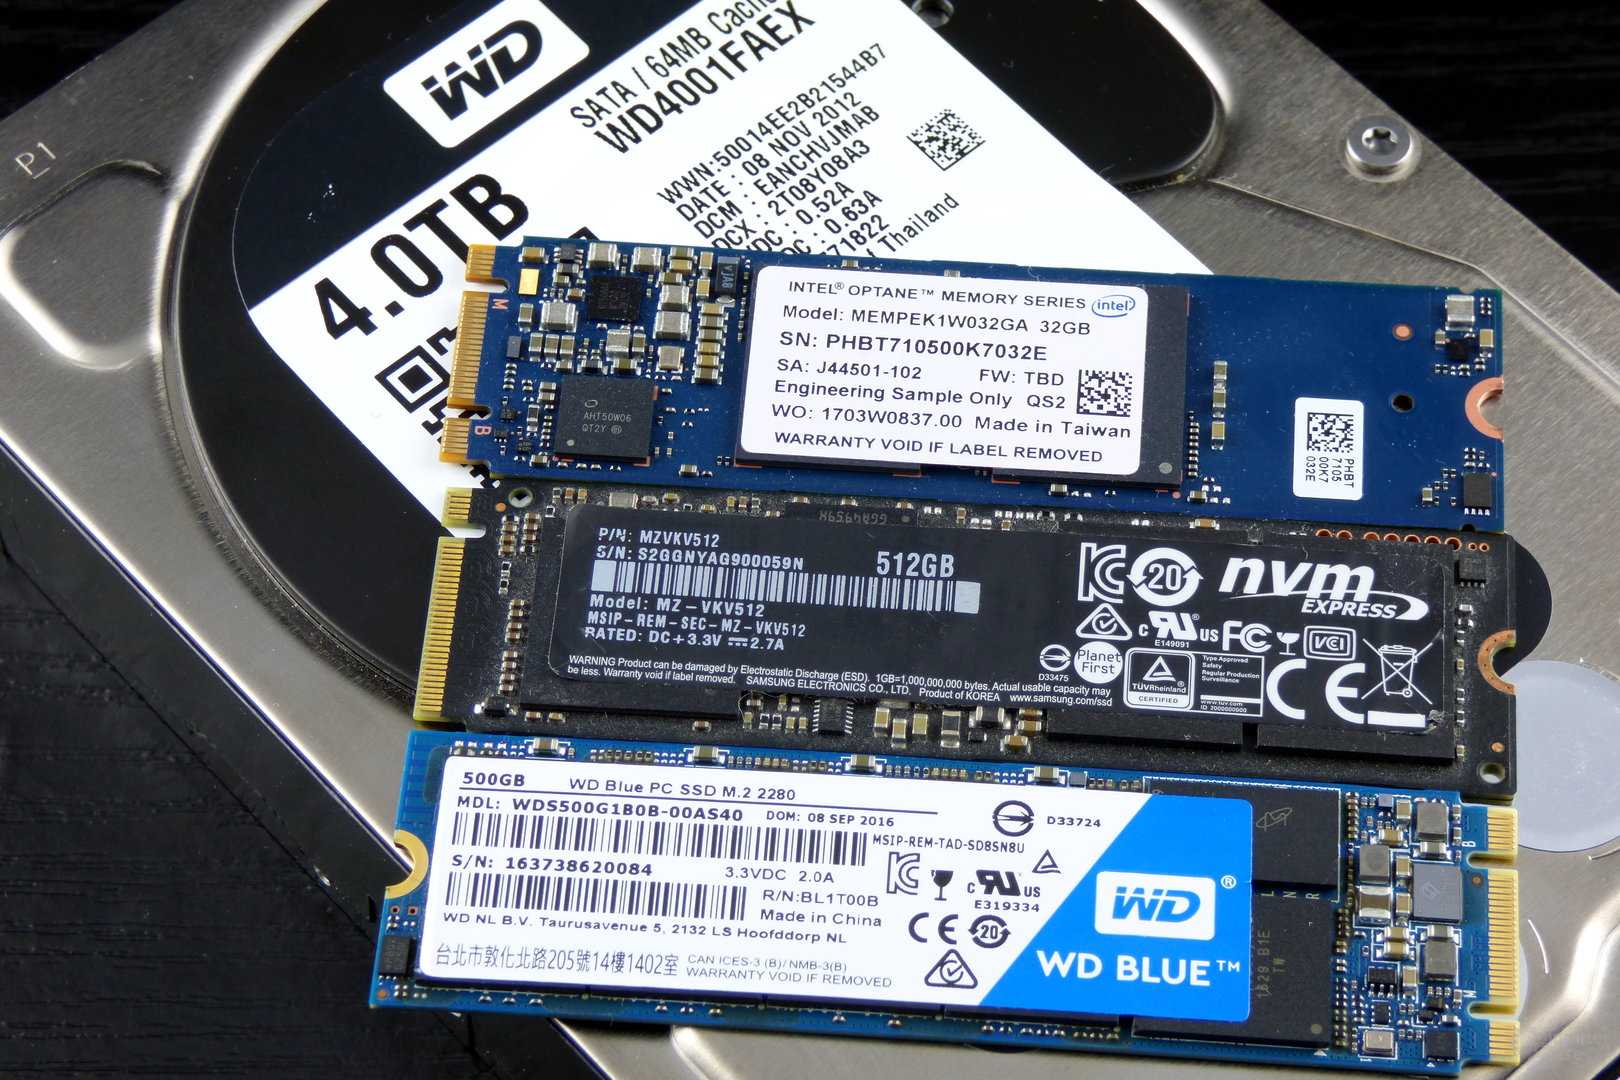 Wd_black an1500 aic ssd review - storagereview.com